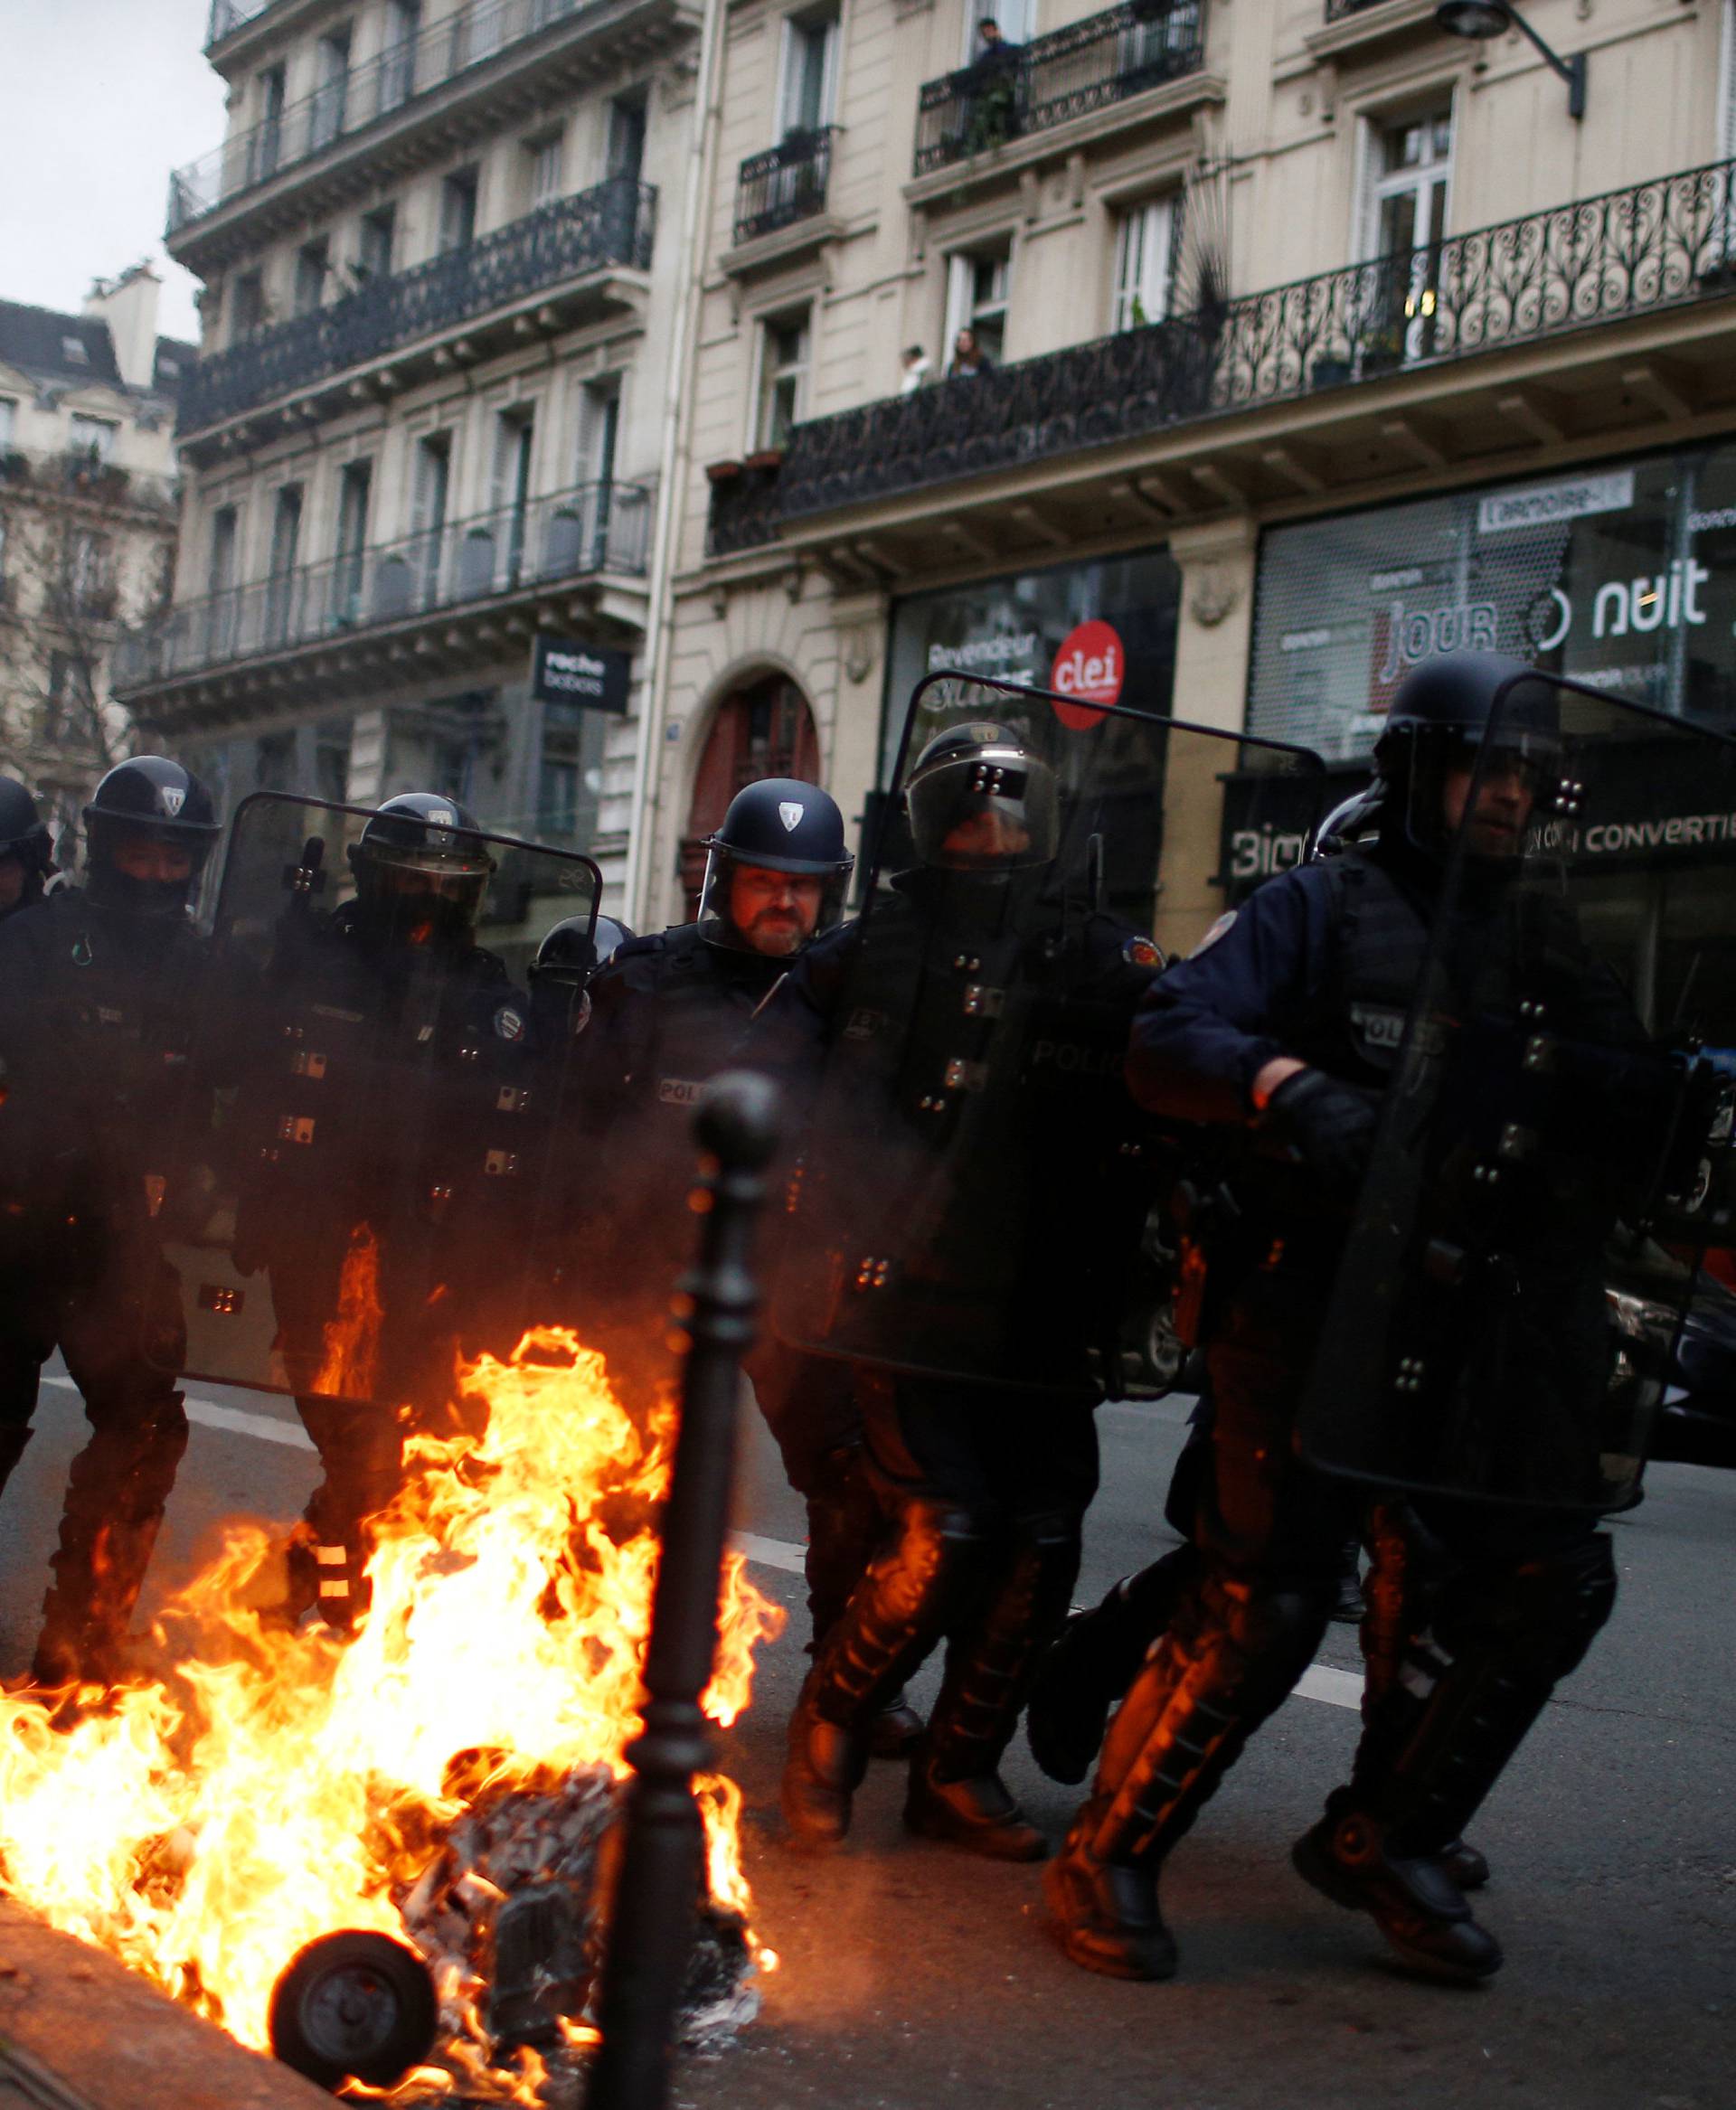 French riot police run in a street during clashes with protesters wearing yellow vests during a national day of protest by the "yellow vests" movement in Paris